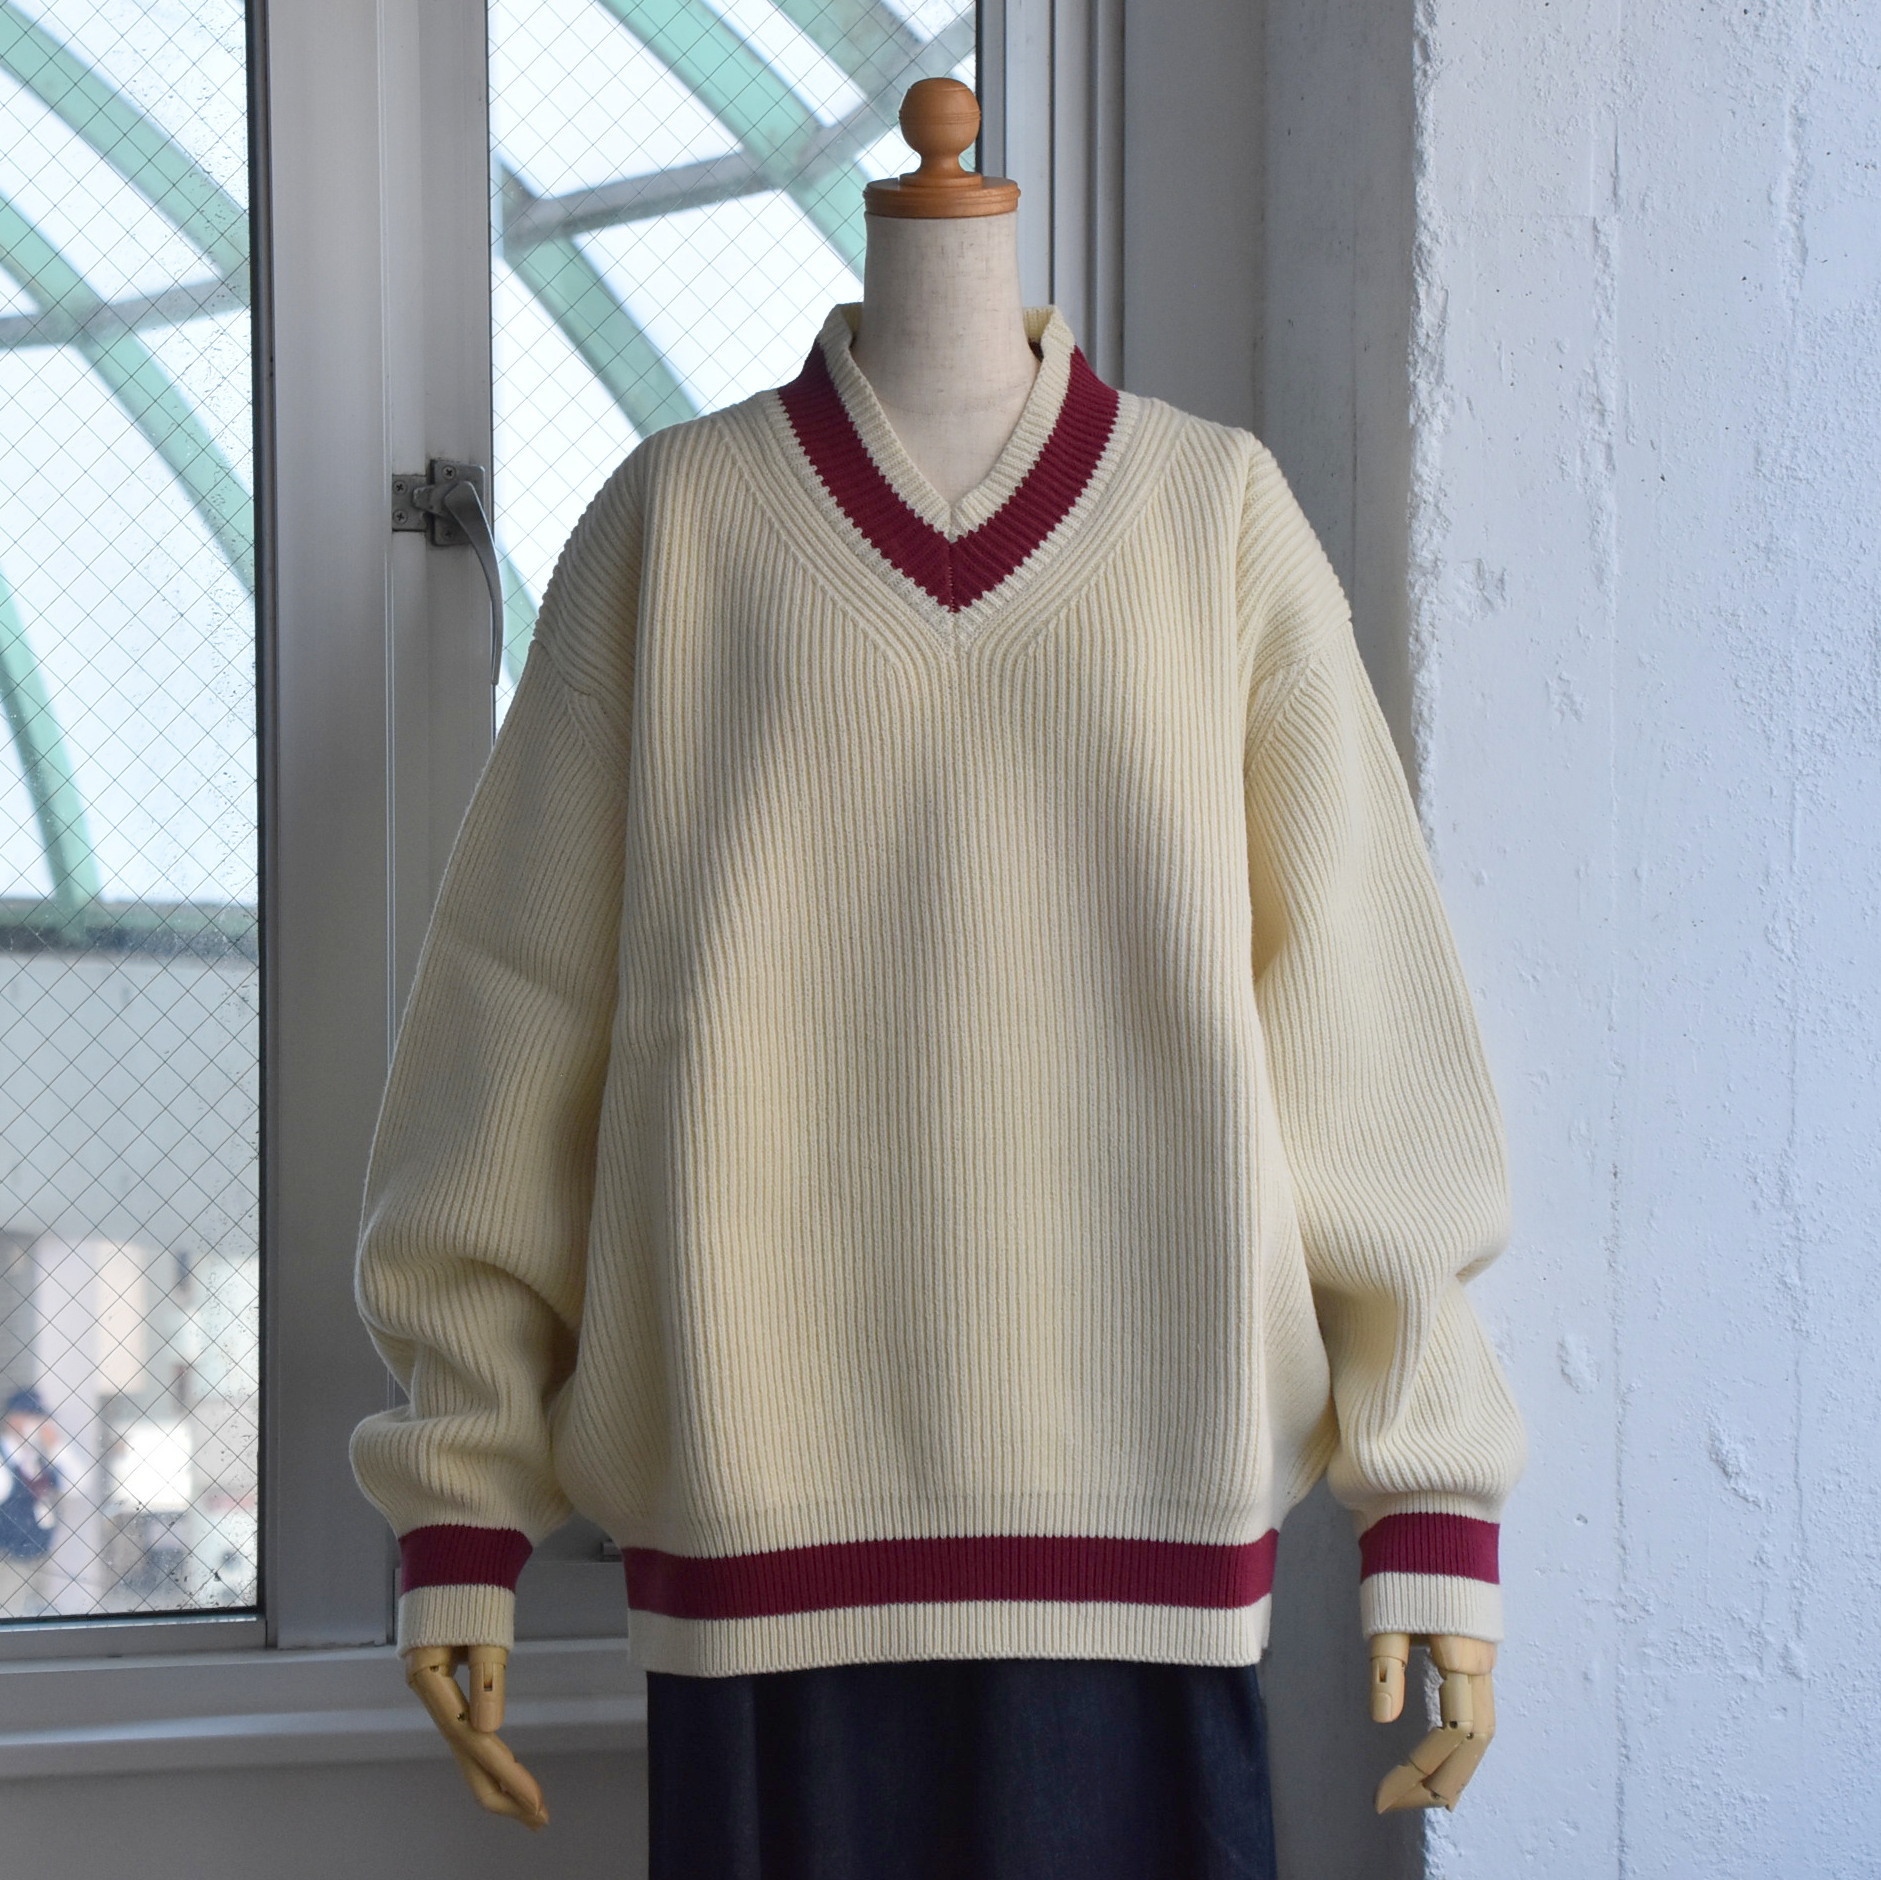 SOFIE D'HOORE(ソフィードール) / 3ply V-neck contrast color sweater【2色展開】(1)